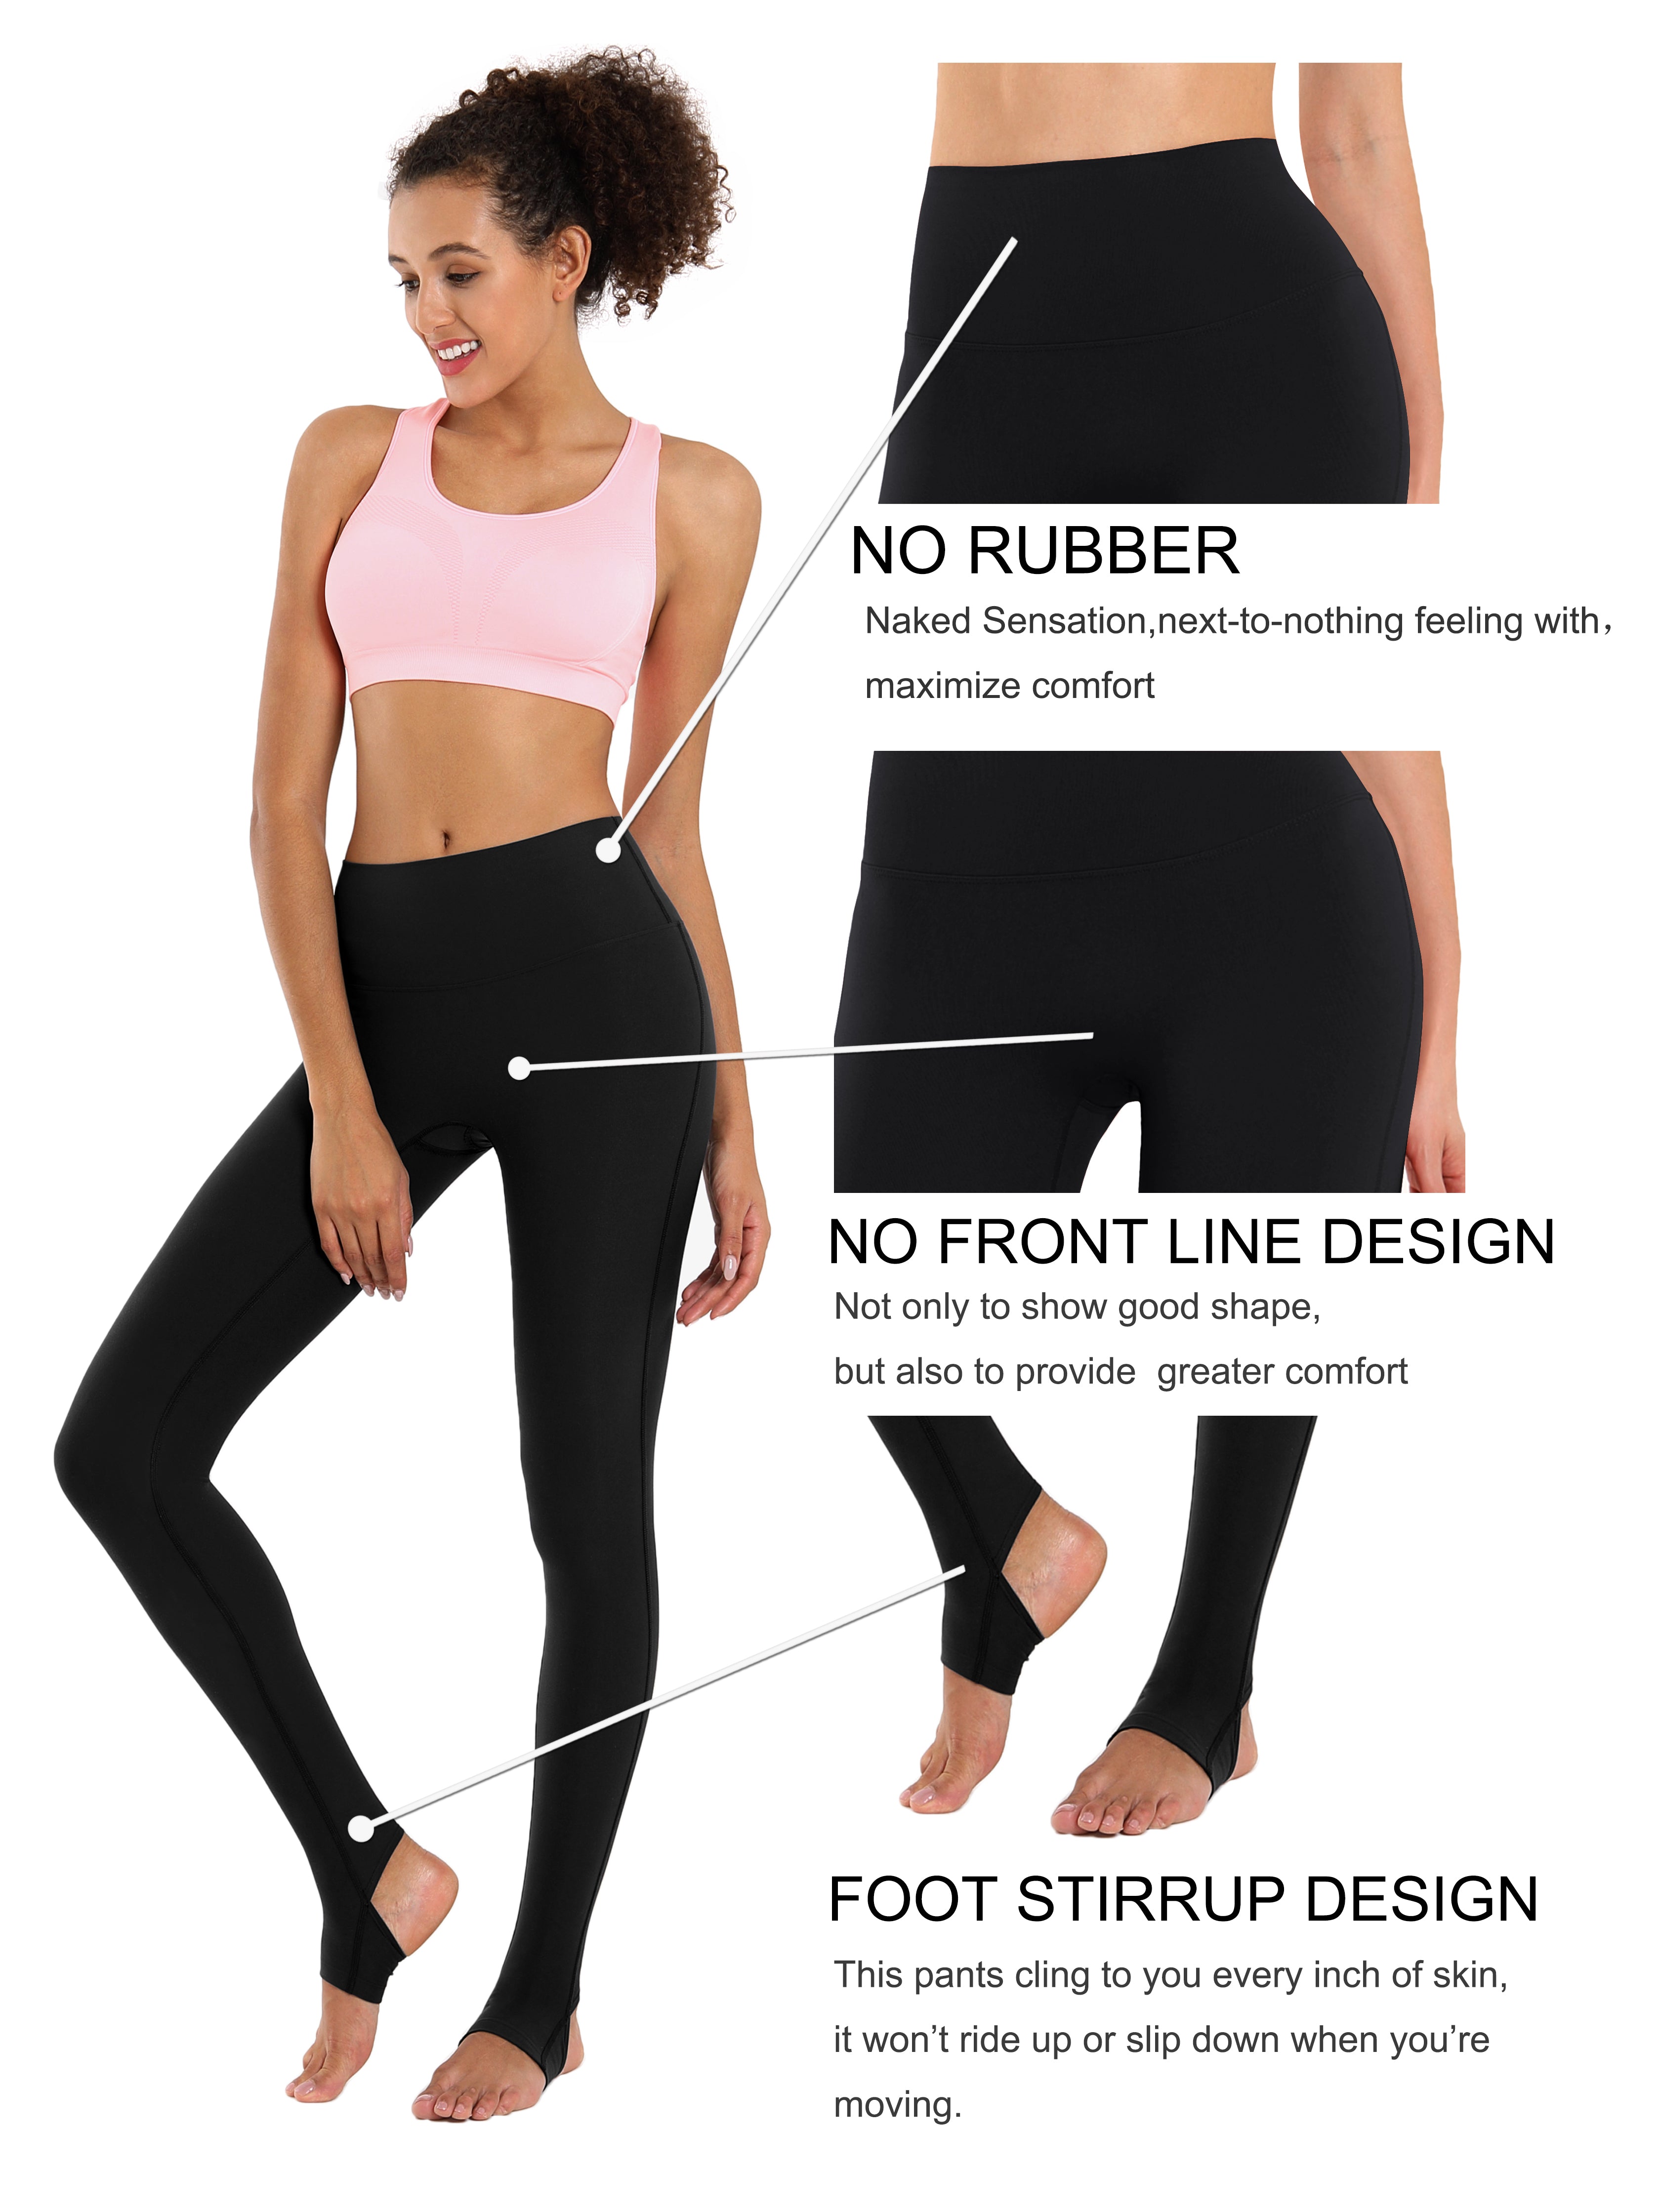 Over the Heel Golf Pants black Over the Heel Design 87%Nylon/13%Spandex Fabric doesn't attract lint easily 4-way stretch No see-through Moisture-wicking Tummy control